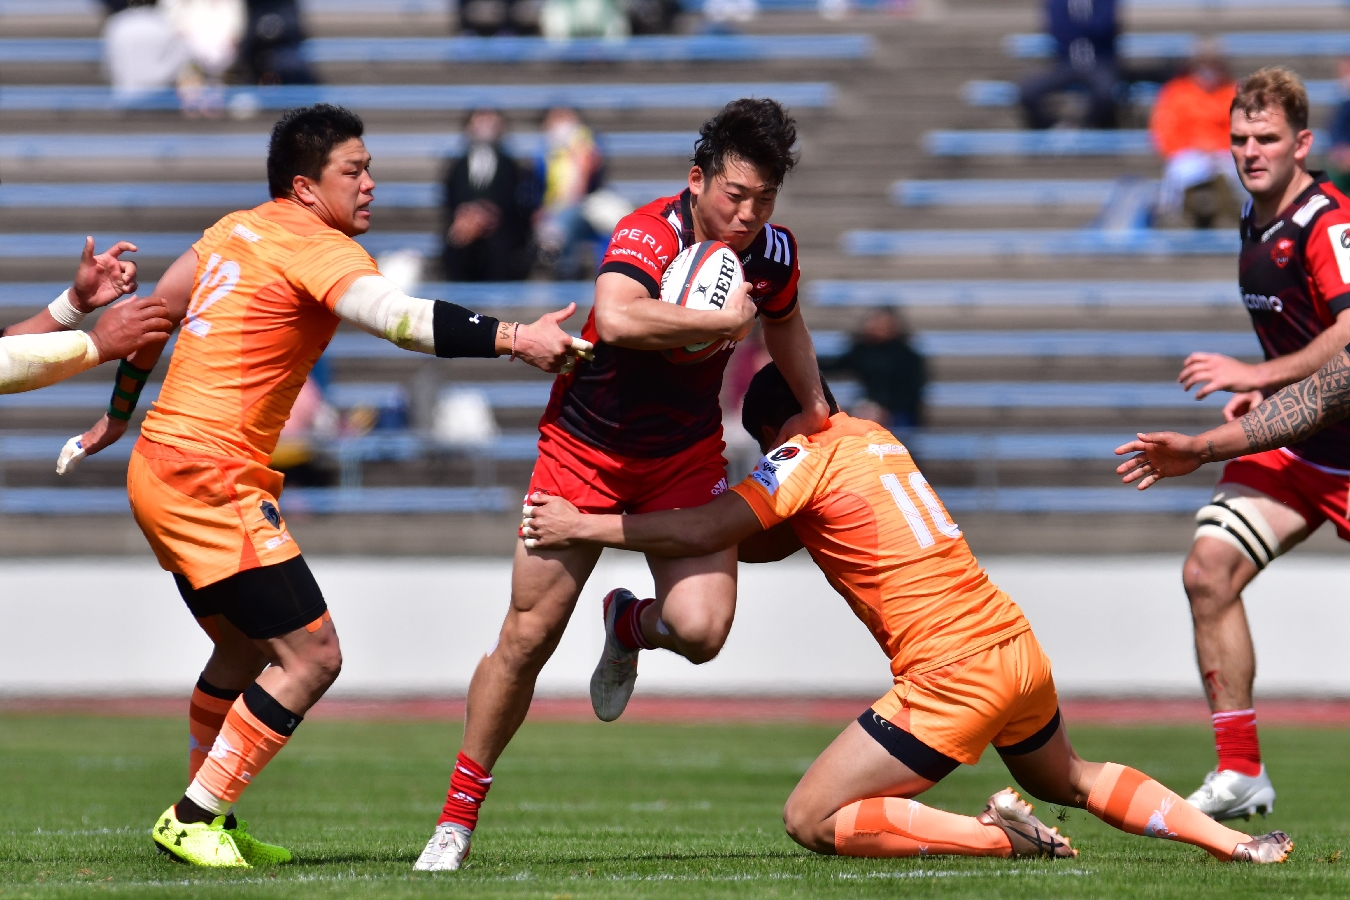 【NTT JAPAN RUGBY LEAGUE ONE 2022 リーグ戦】第11節 クボタスピアーズ船橋・東京ベイに敗北